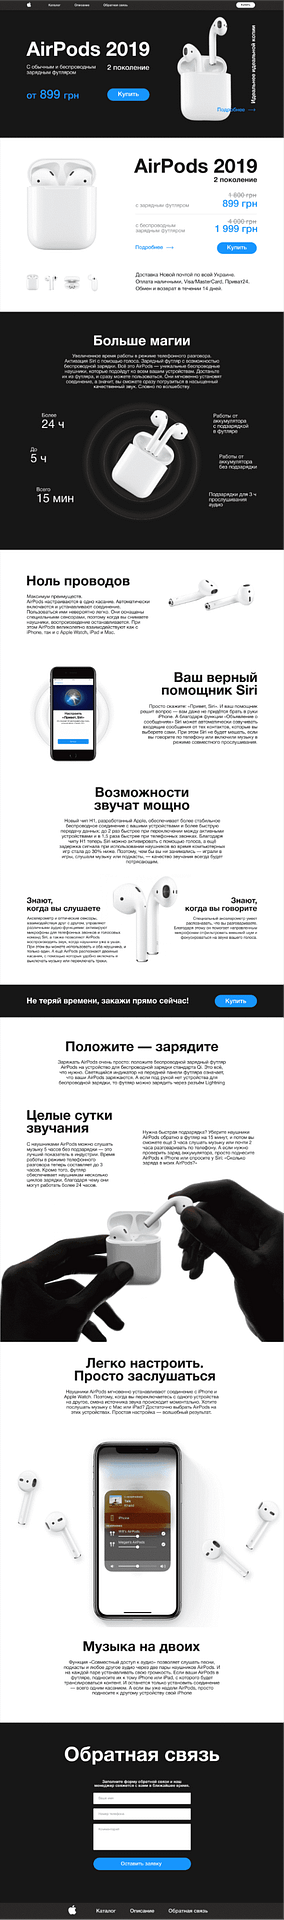 Airpods-2019